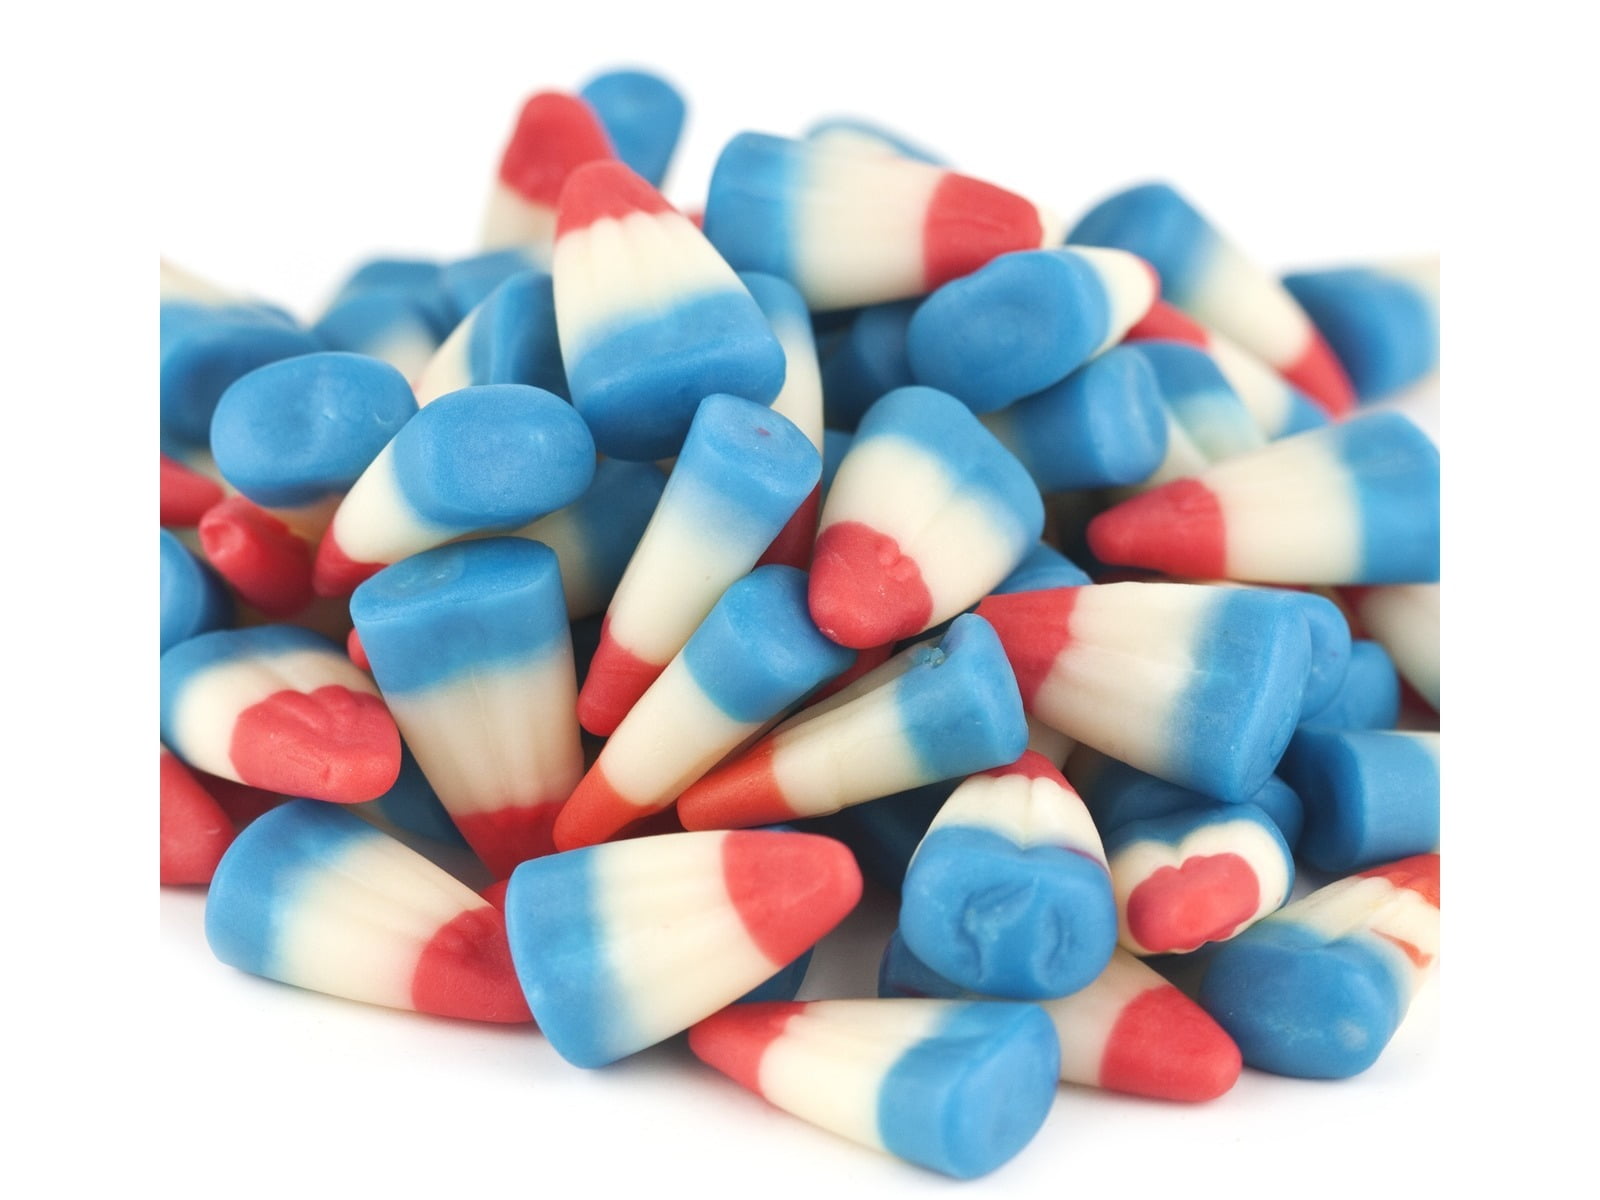 Patriotic Candy Corn 2 Pounds Red White Blue Raspberry Lemonade Candy, Size: 2 lbs